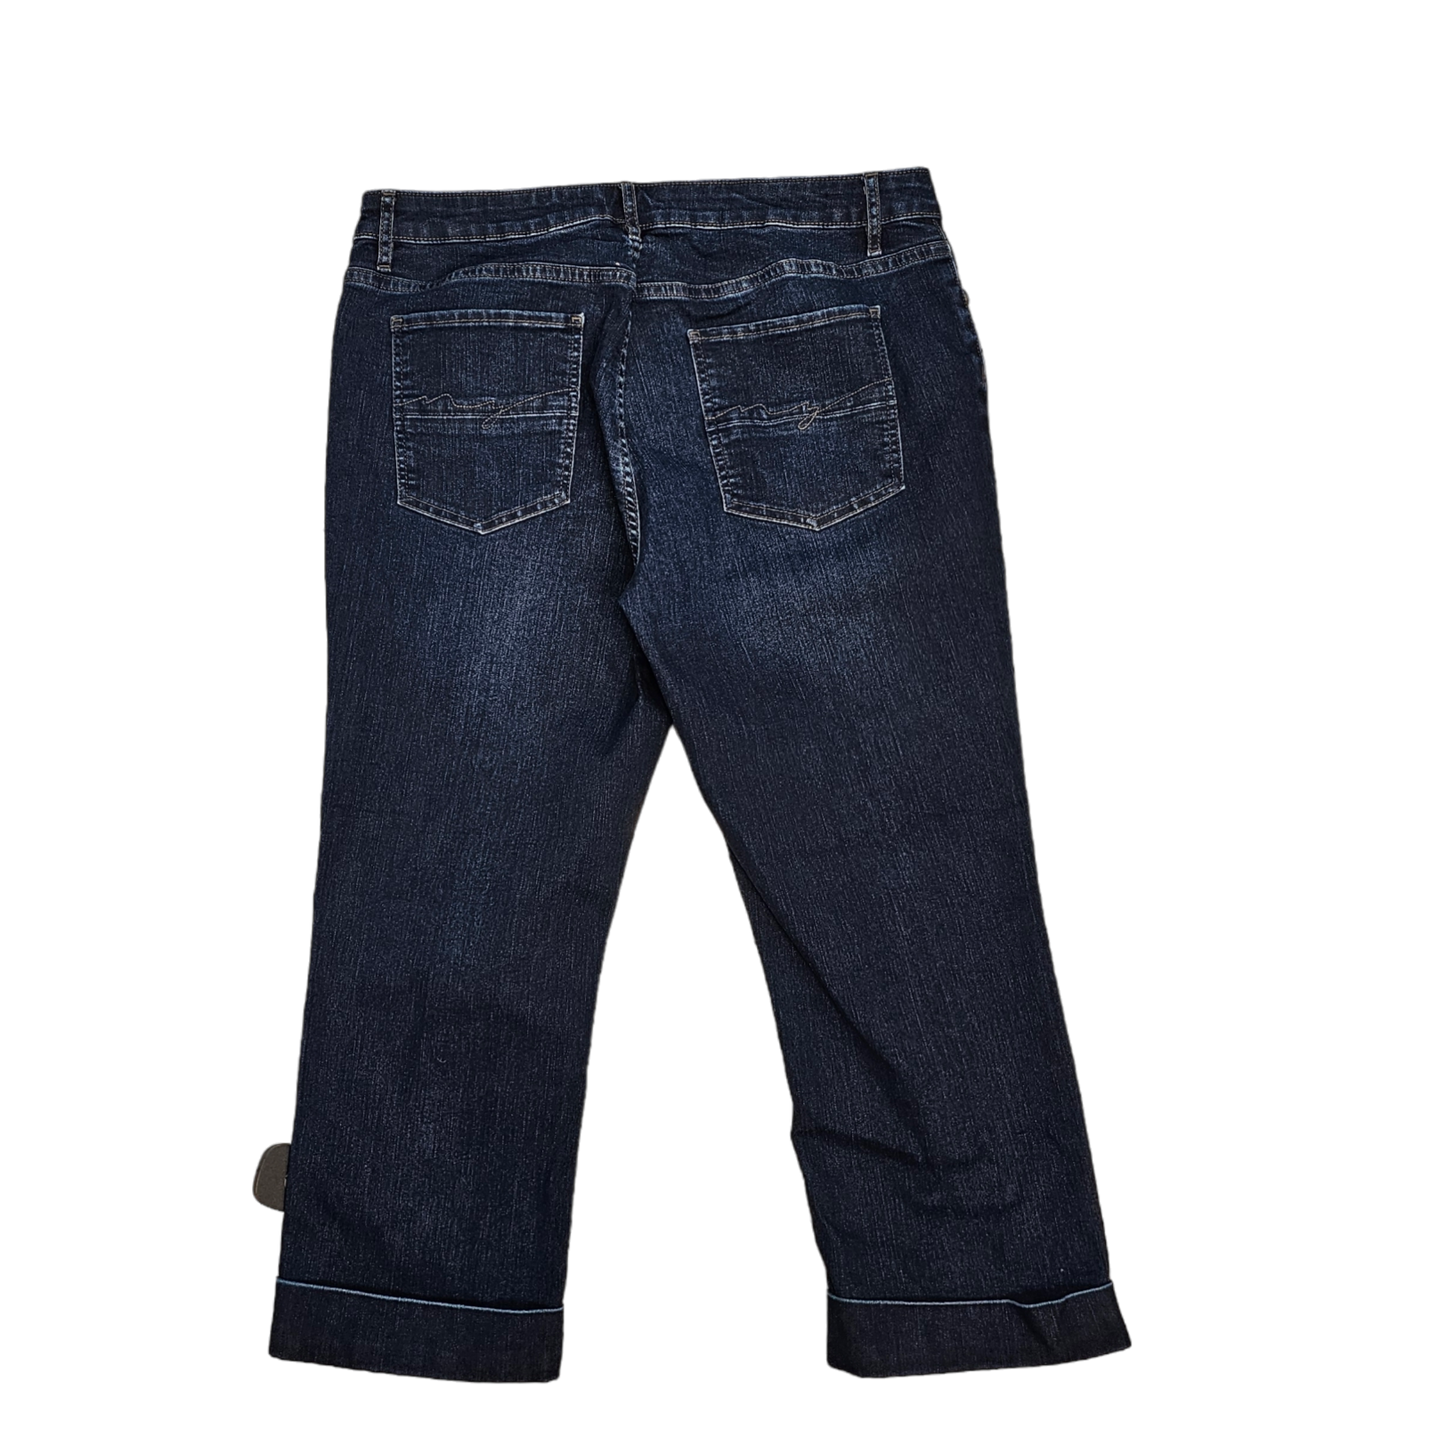 Jeans Cropped By Soho Design Group  Size: 12